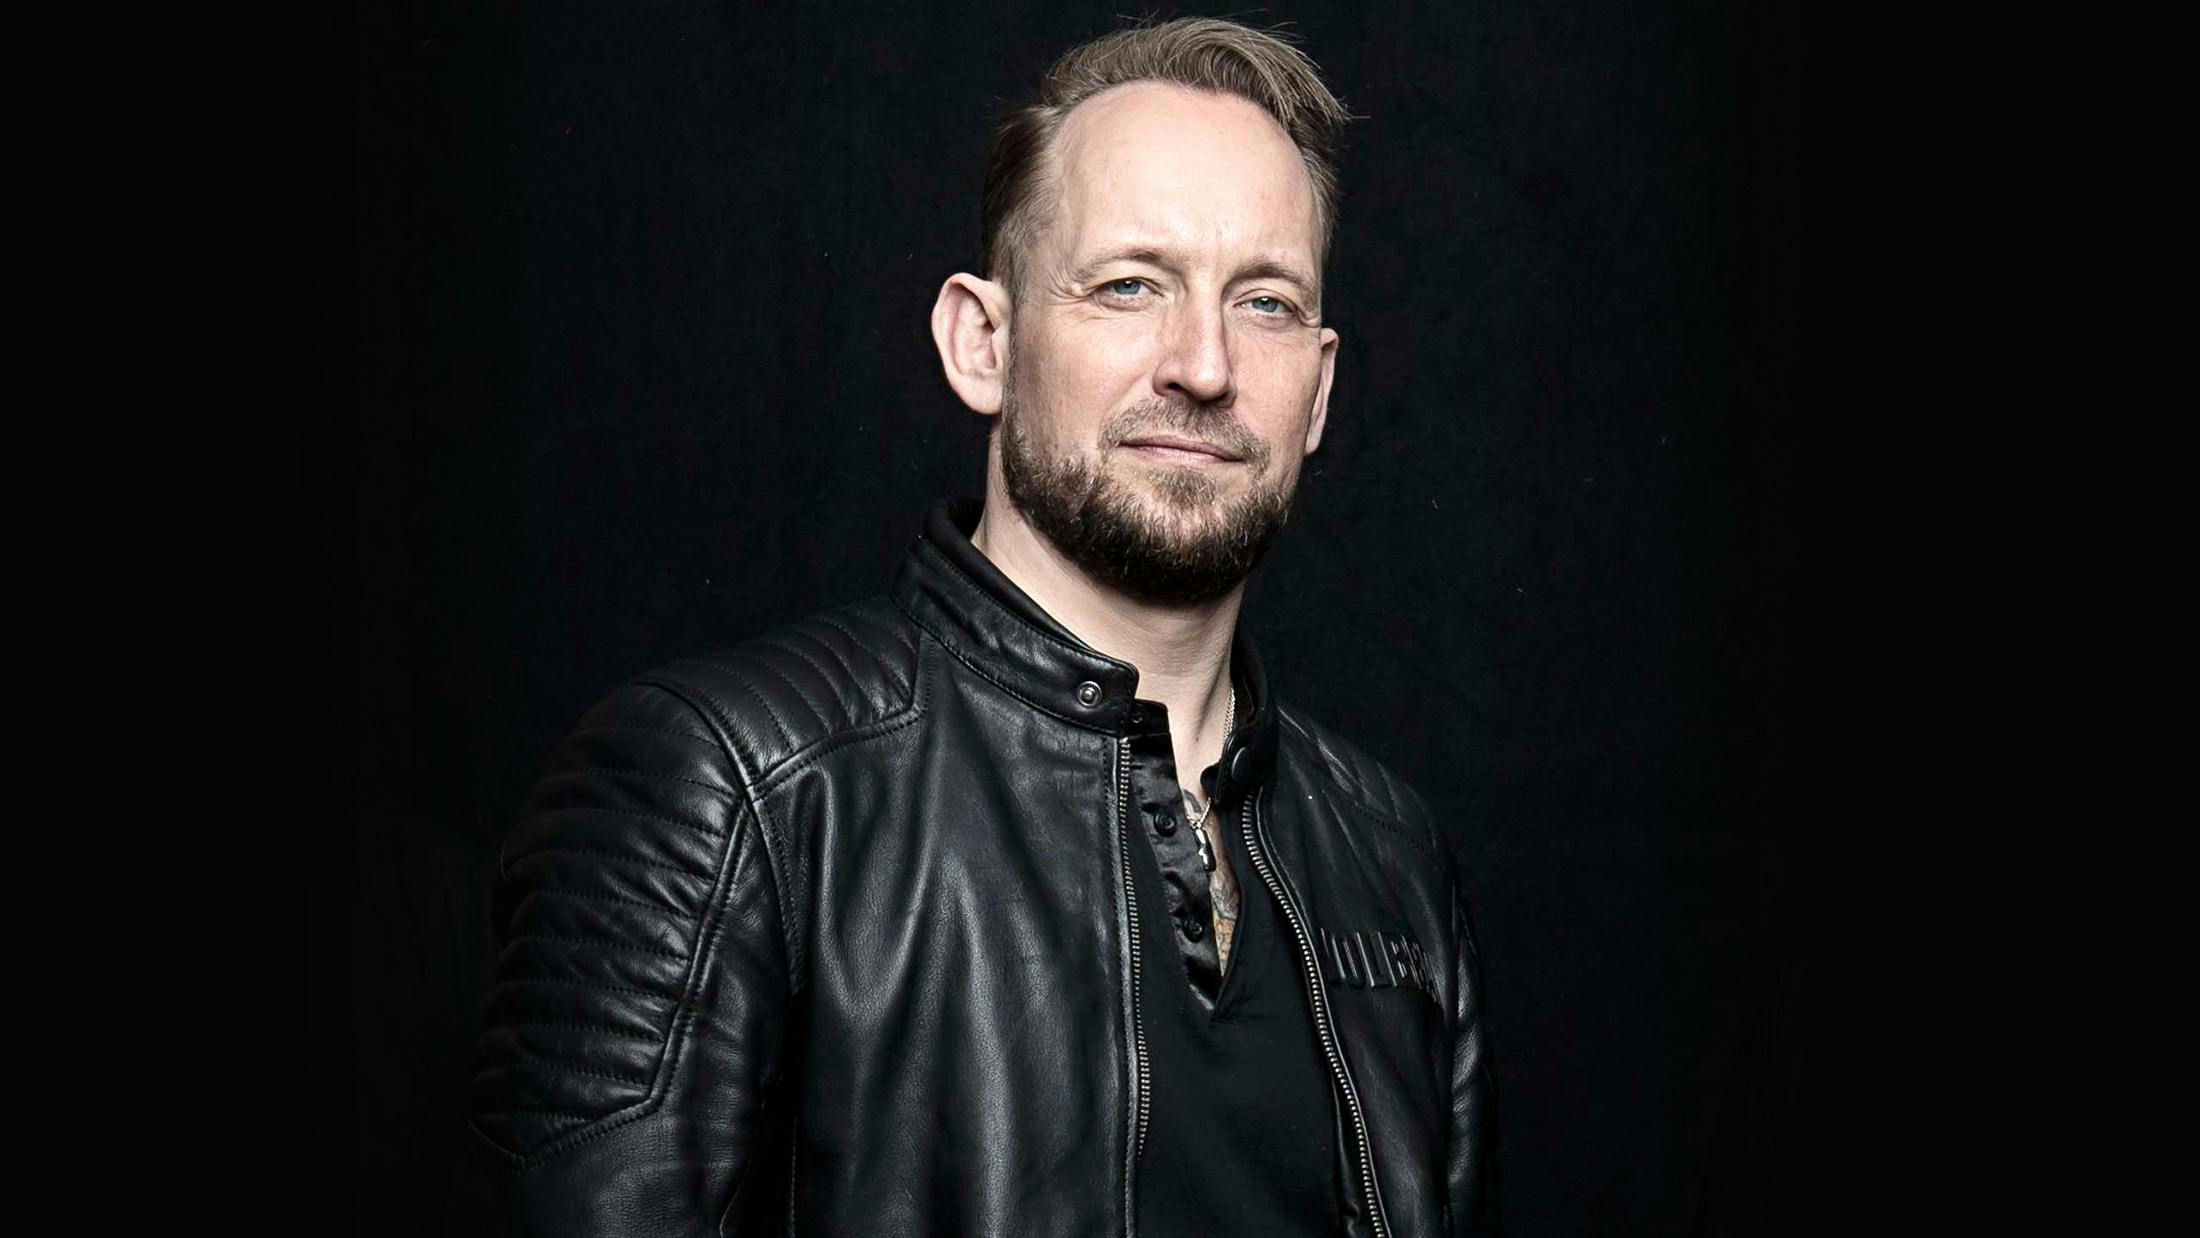 Volbeat’s Michael Poulsen: The 10 songs that changed my life